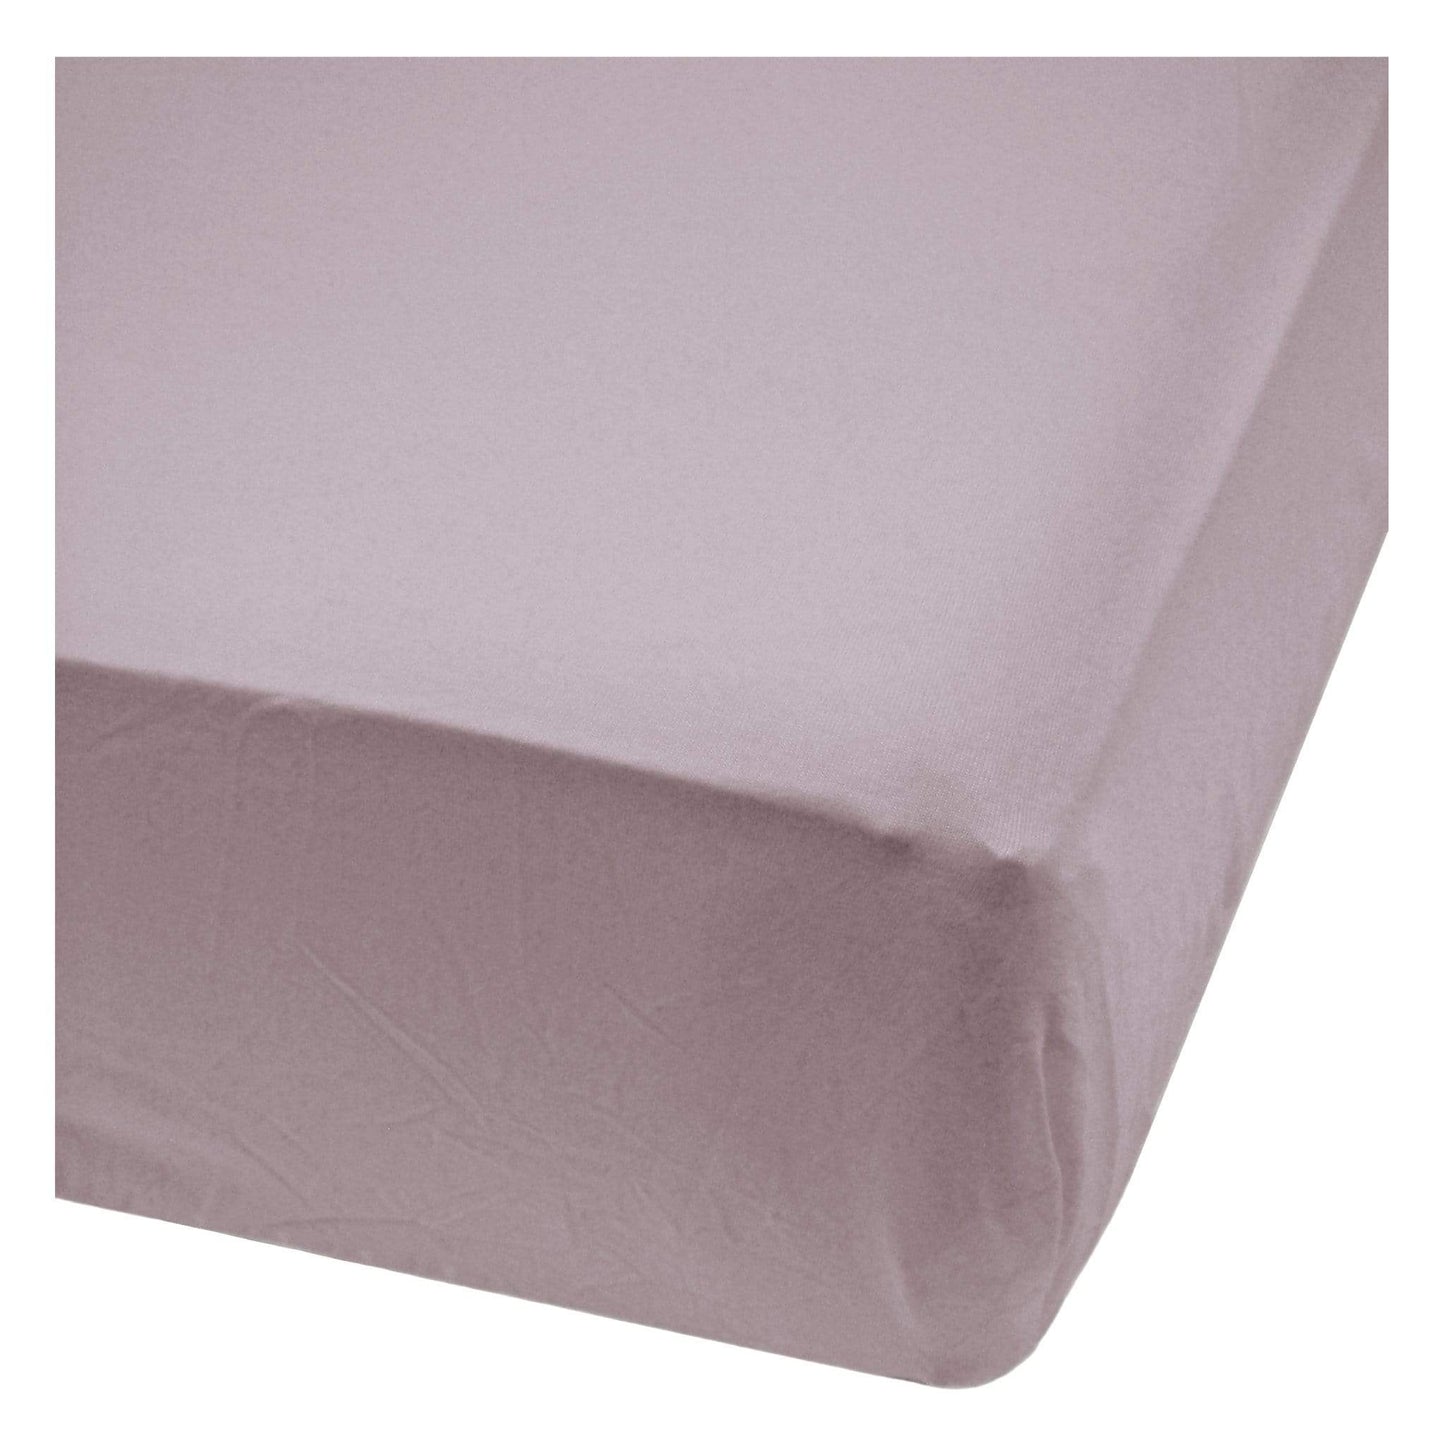 Bamboo fitted sheet - Plum